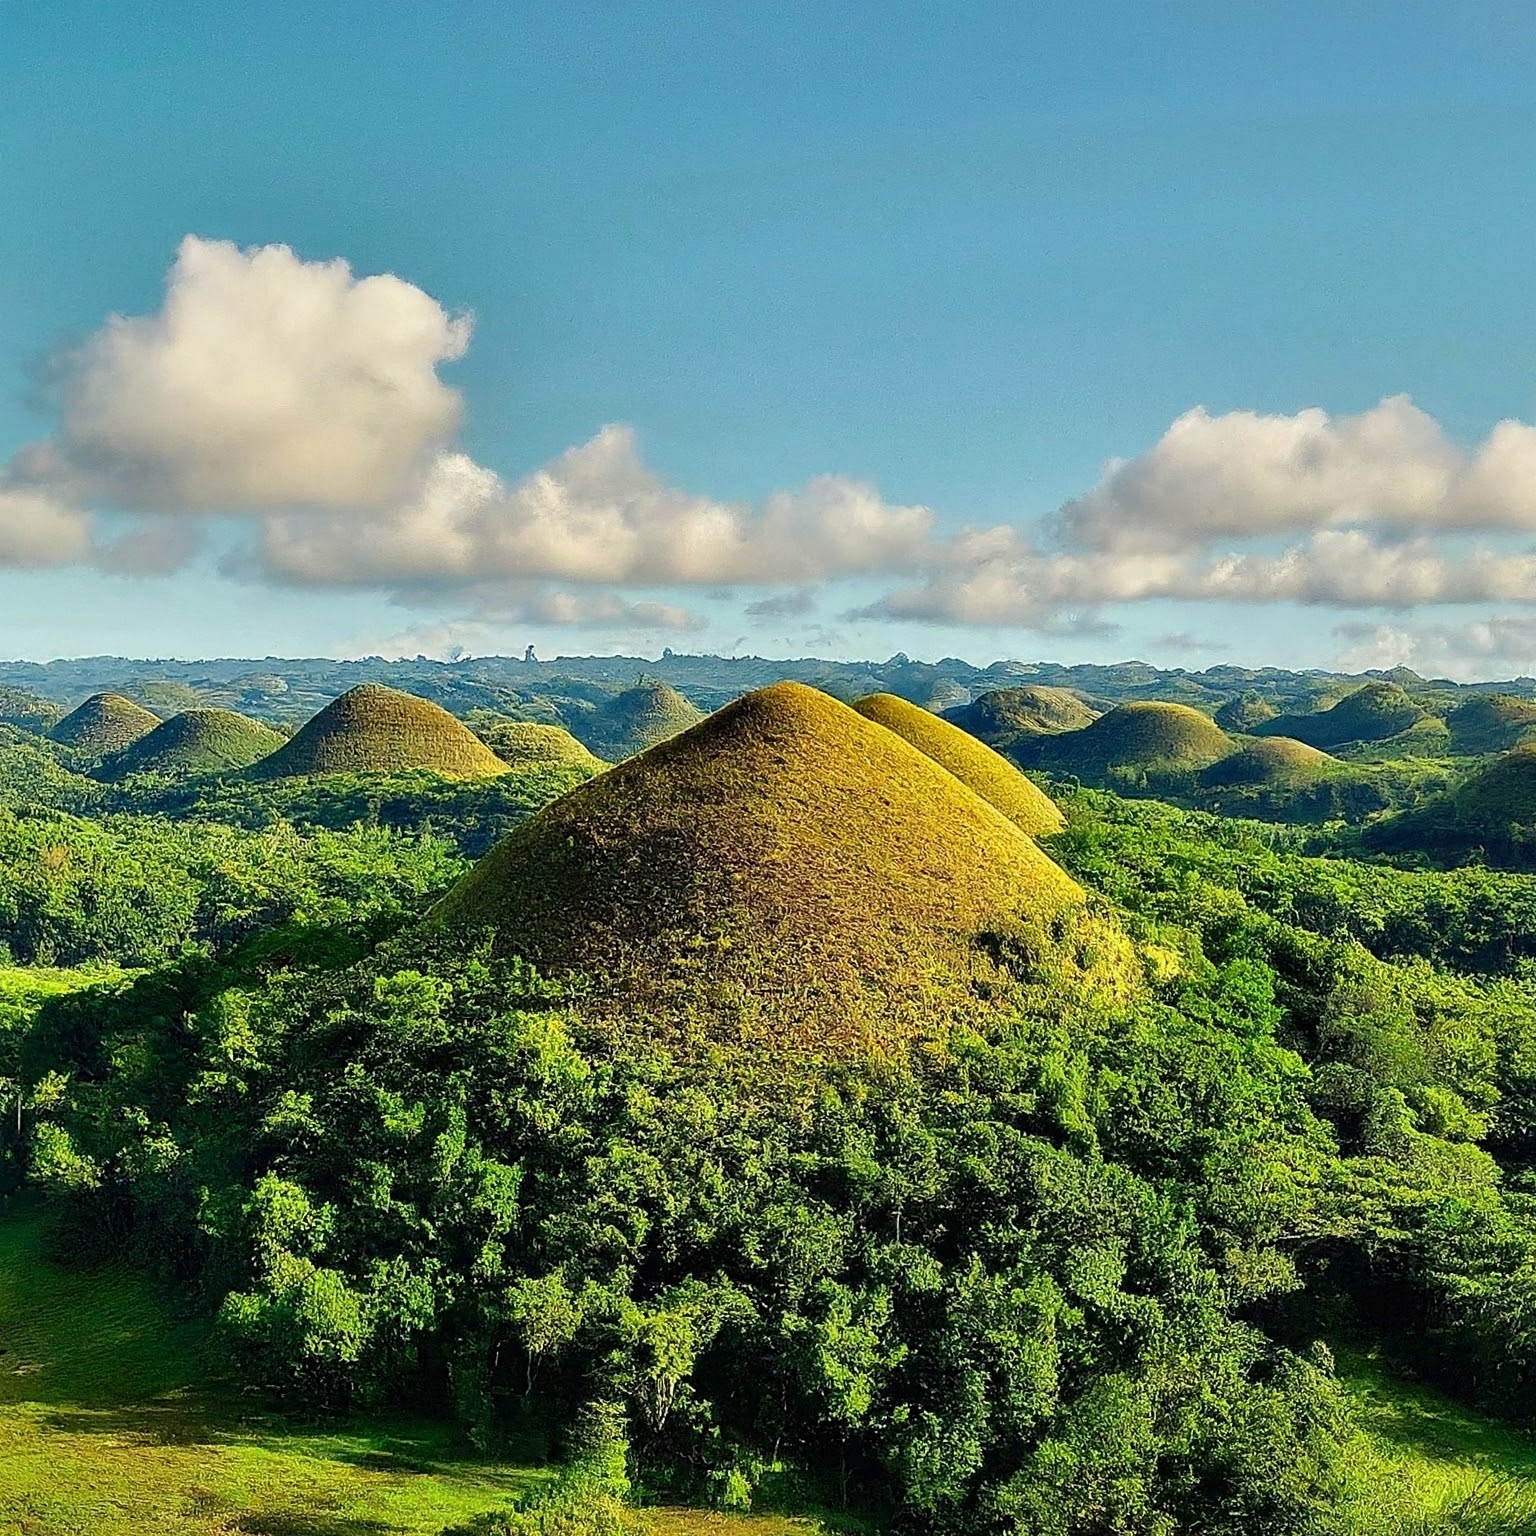 The Chocolate Hills of Bohol, Philippines, with dome-shaped formations and lush green plains.